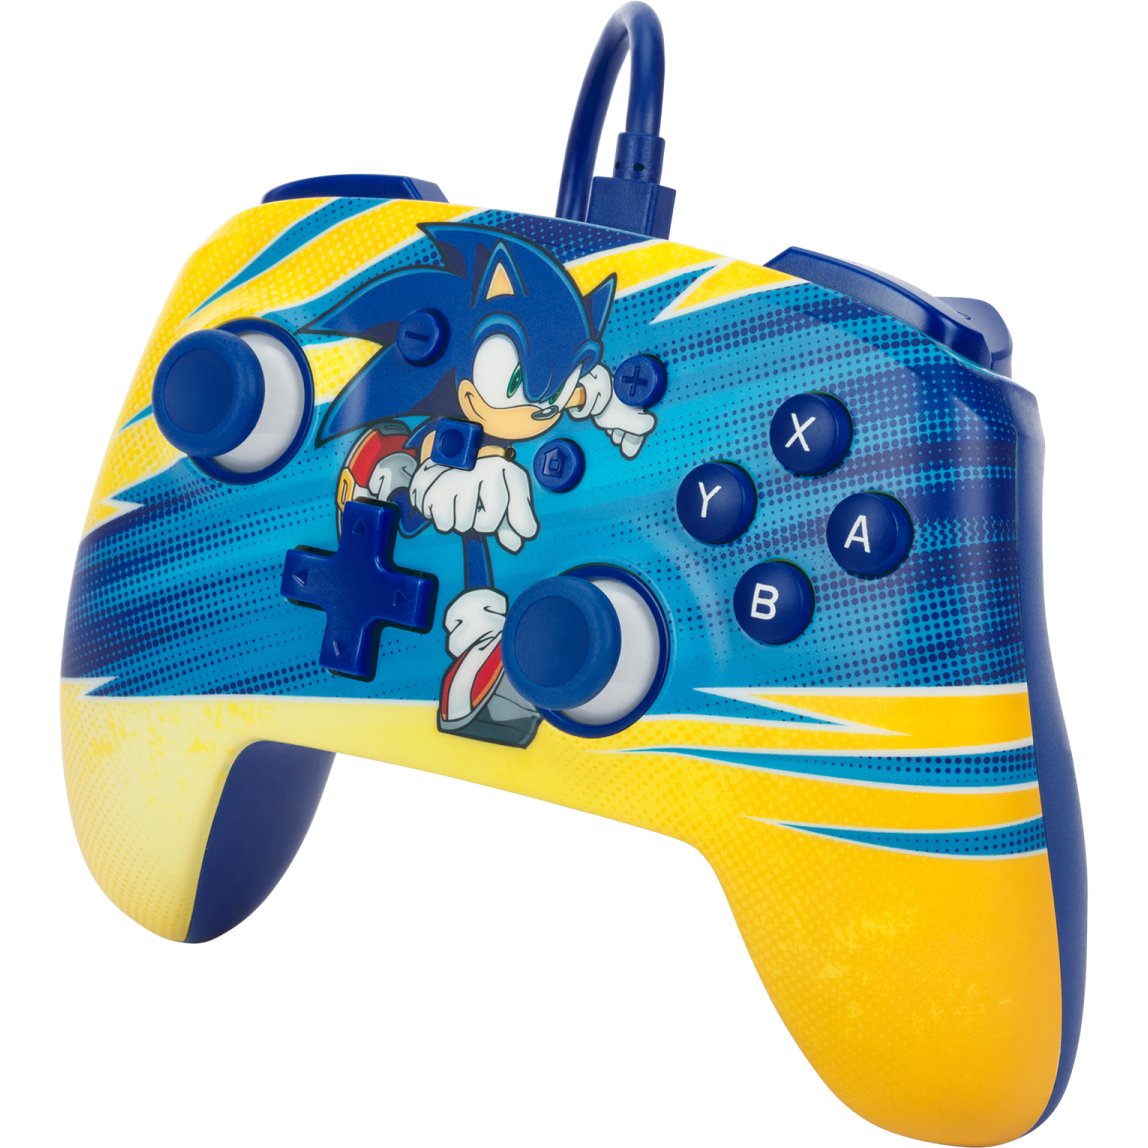 0617885062216 PowerA Enhanced Wired NSW Controller - Sonic Boost - Control Computer & IT,Nintendo,Nintendo tilbehør 18900009450 NSGP0202-01